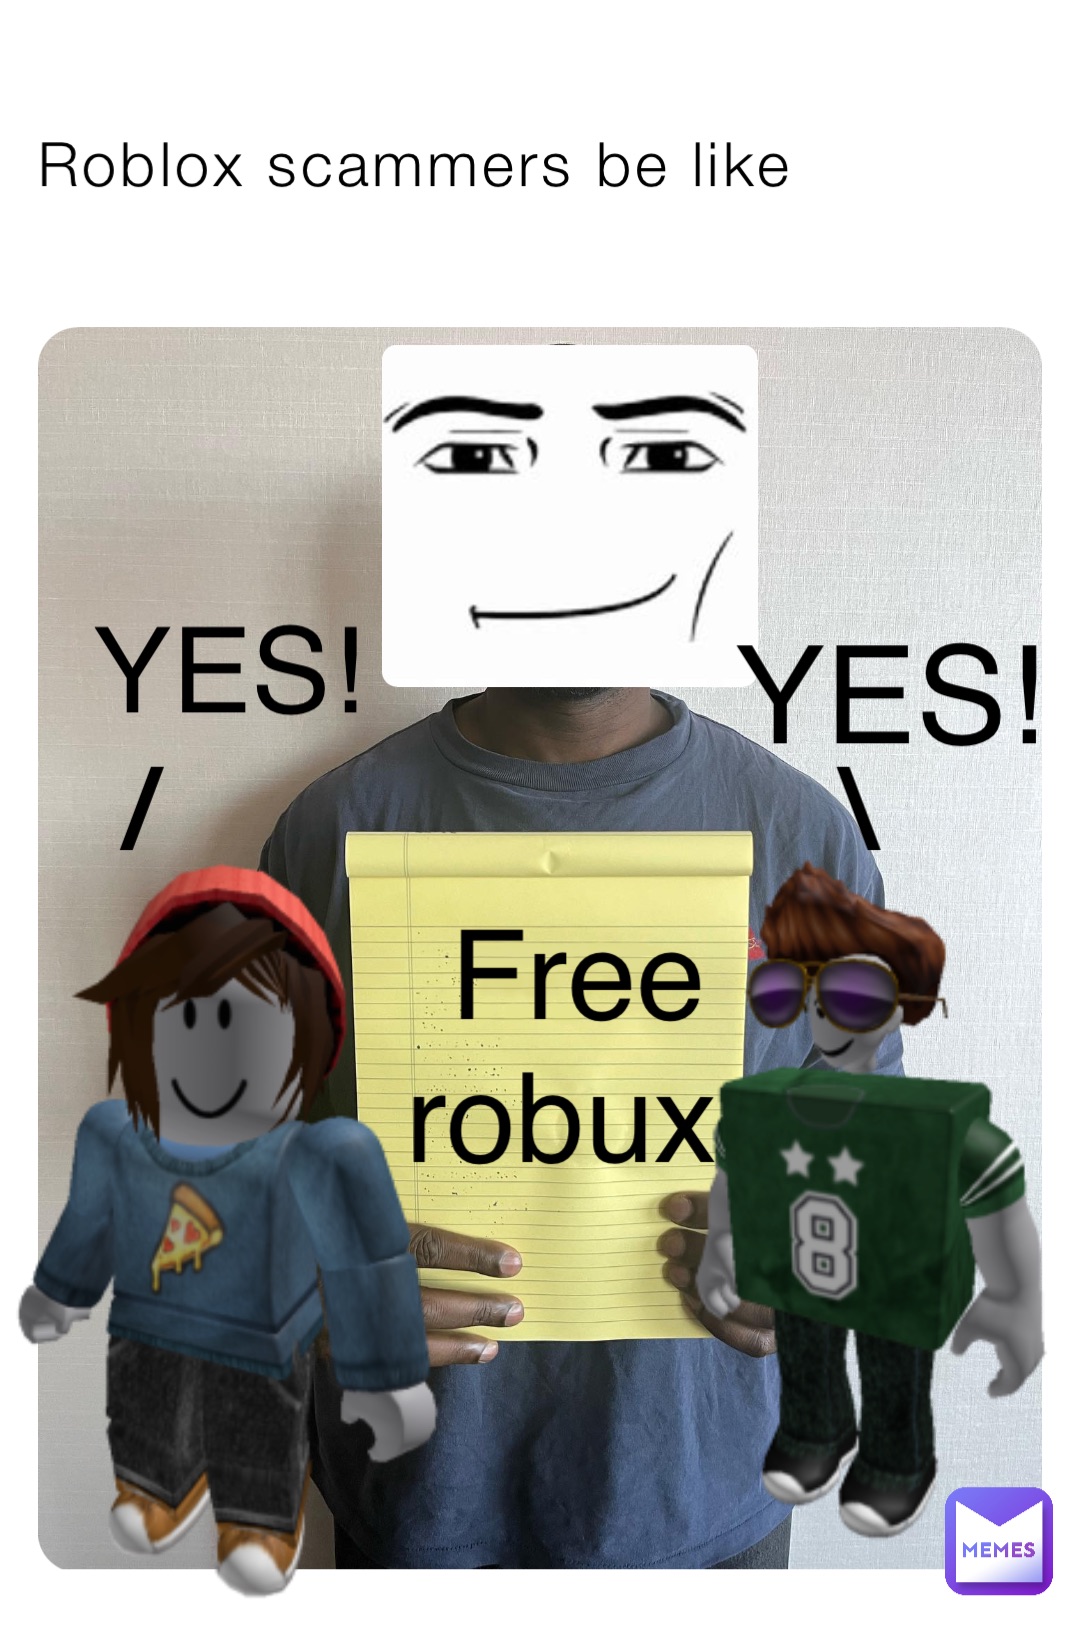 Roblox scammers be like Free robux /                      \ YES! YES!